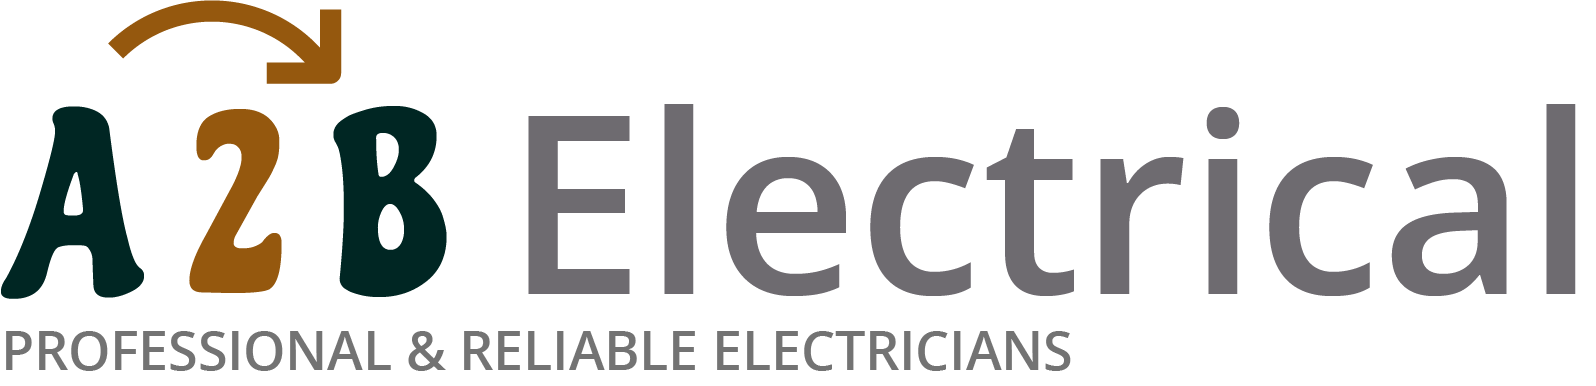 If you have electrical wiring problems in Corringham, we can provide an electrician to have a look for you. 